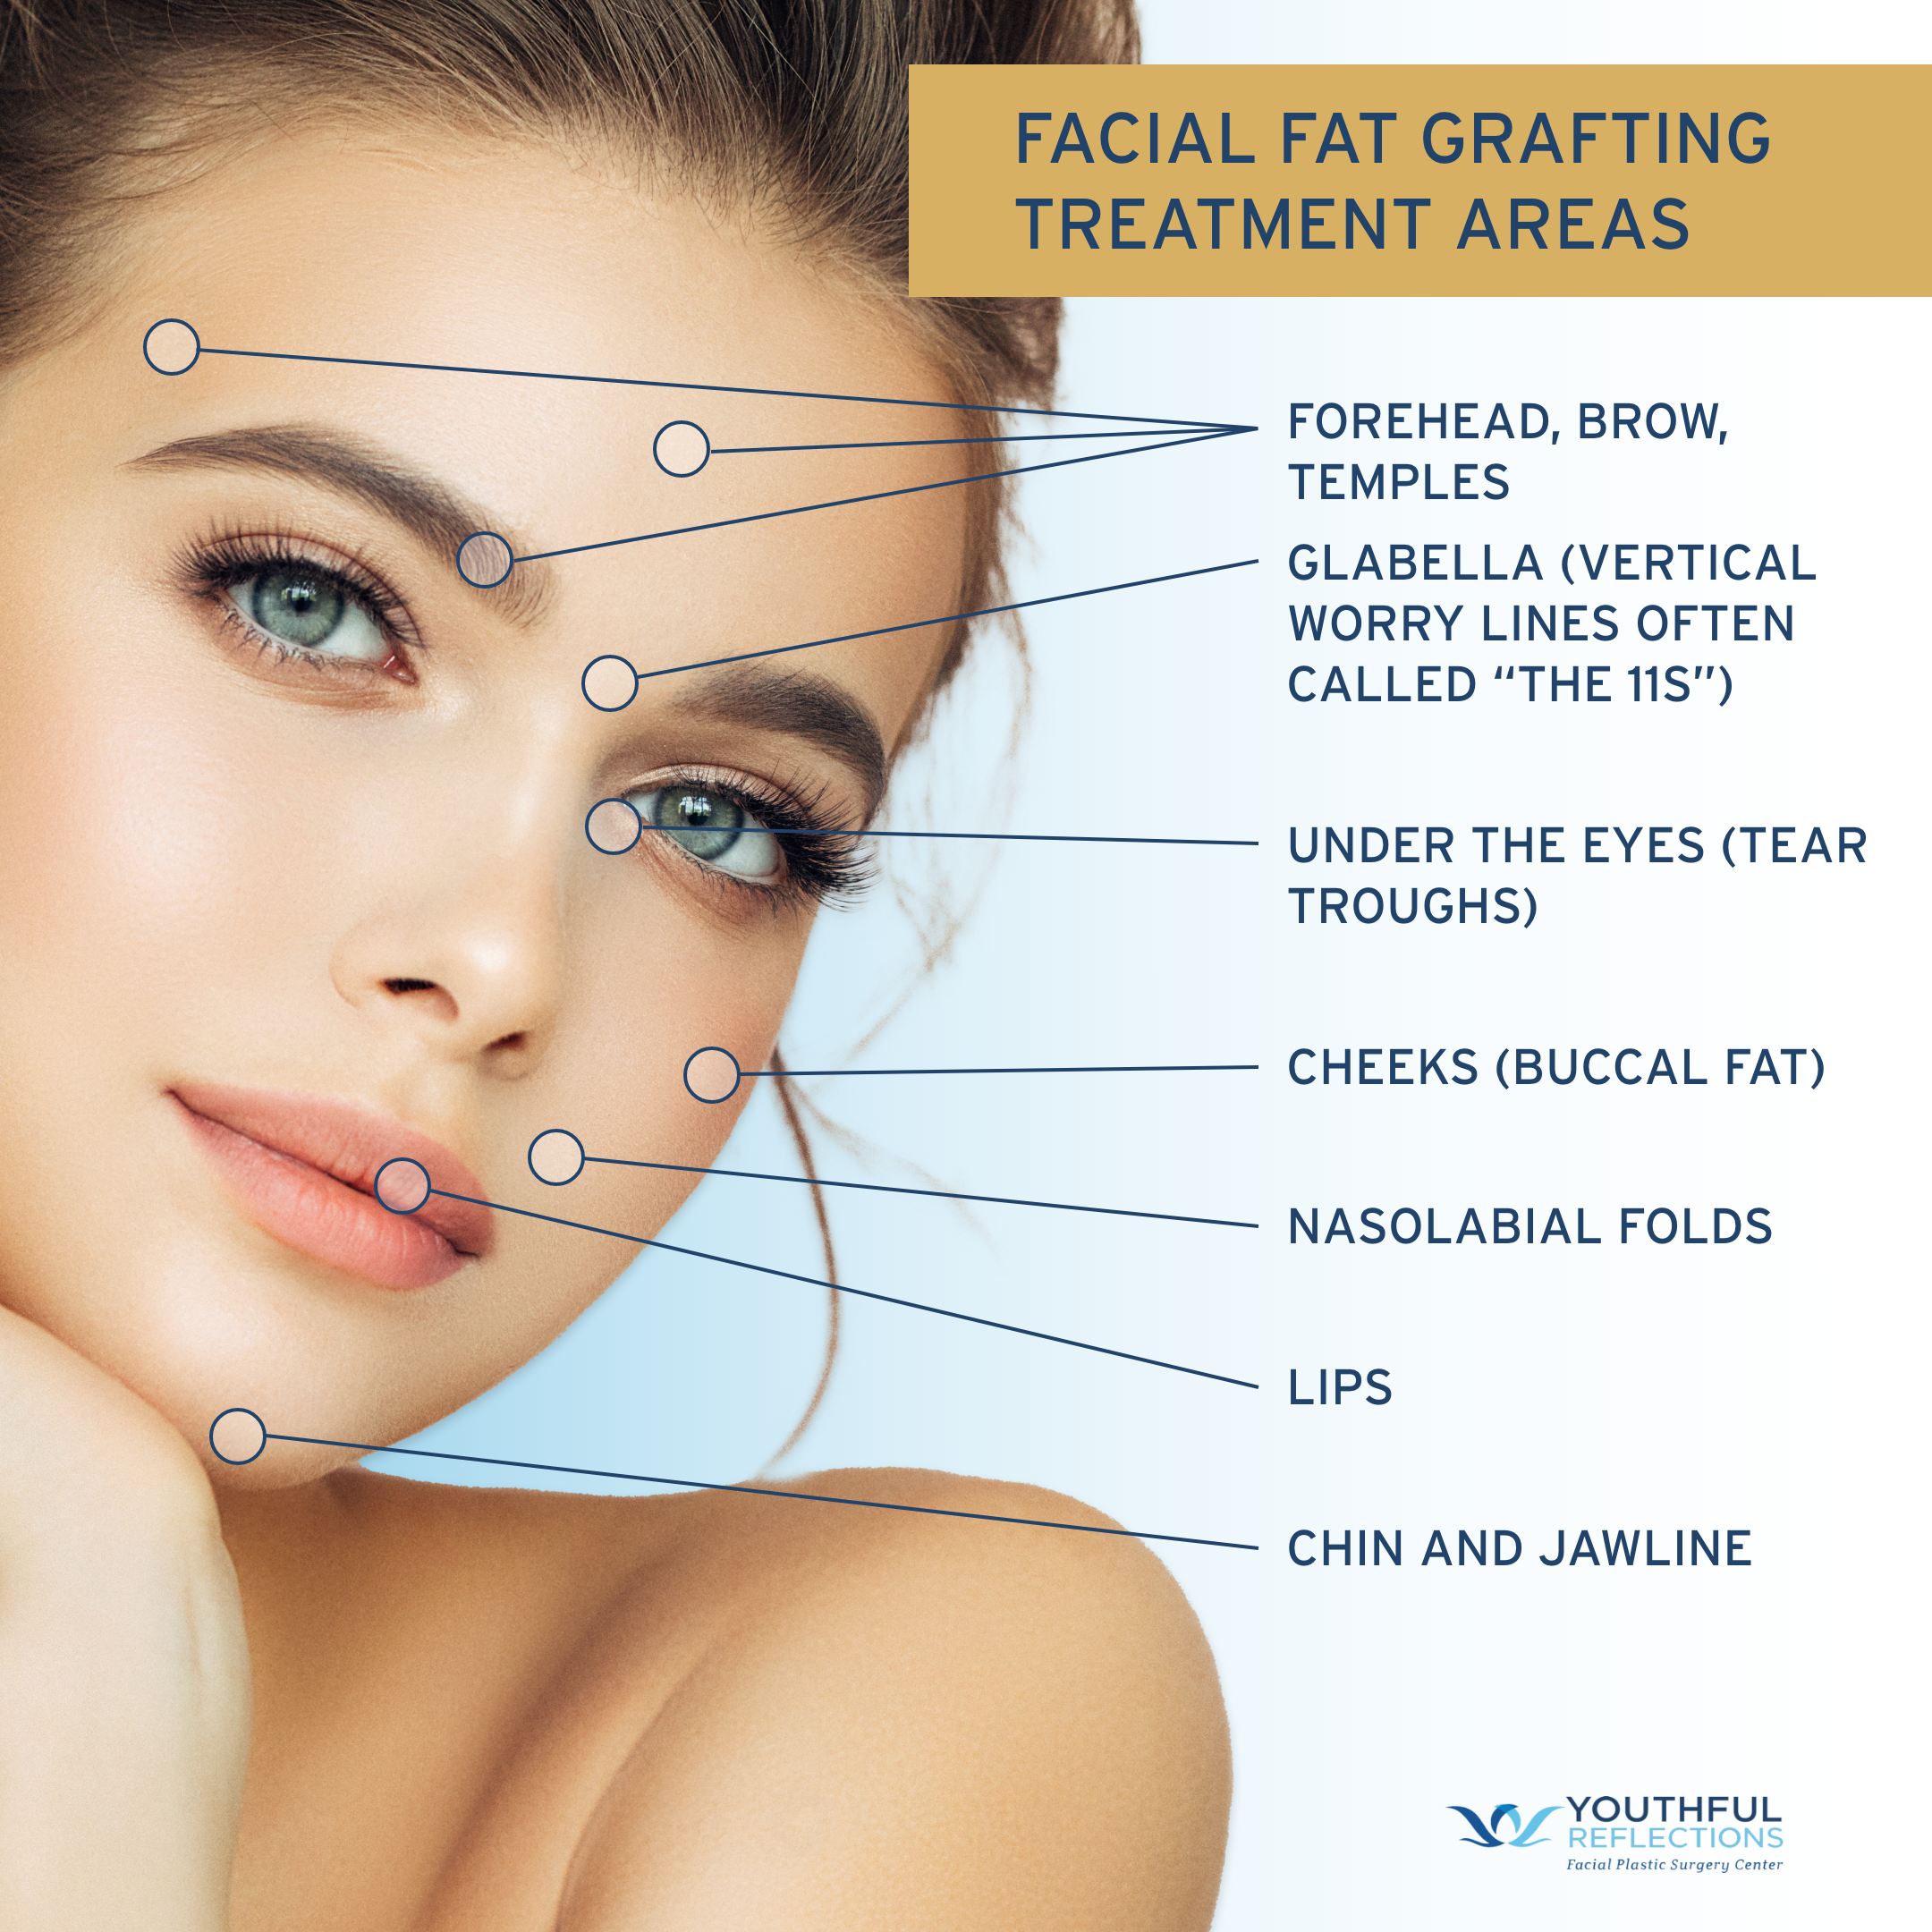 A diagram showing the treatment areas for facial fat grafting.